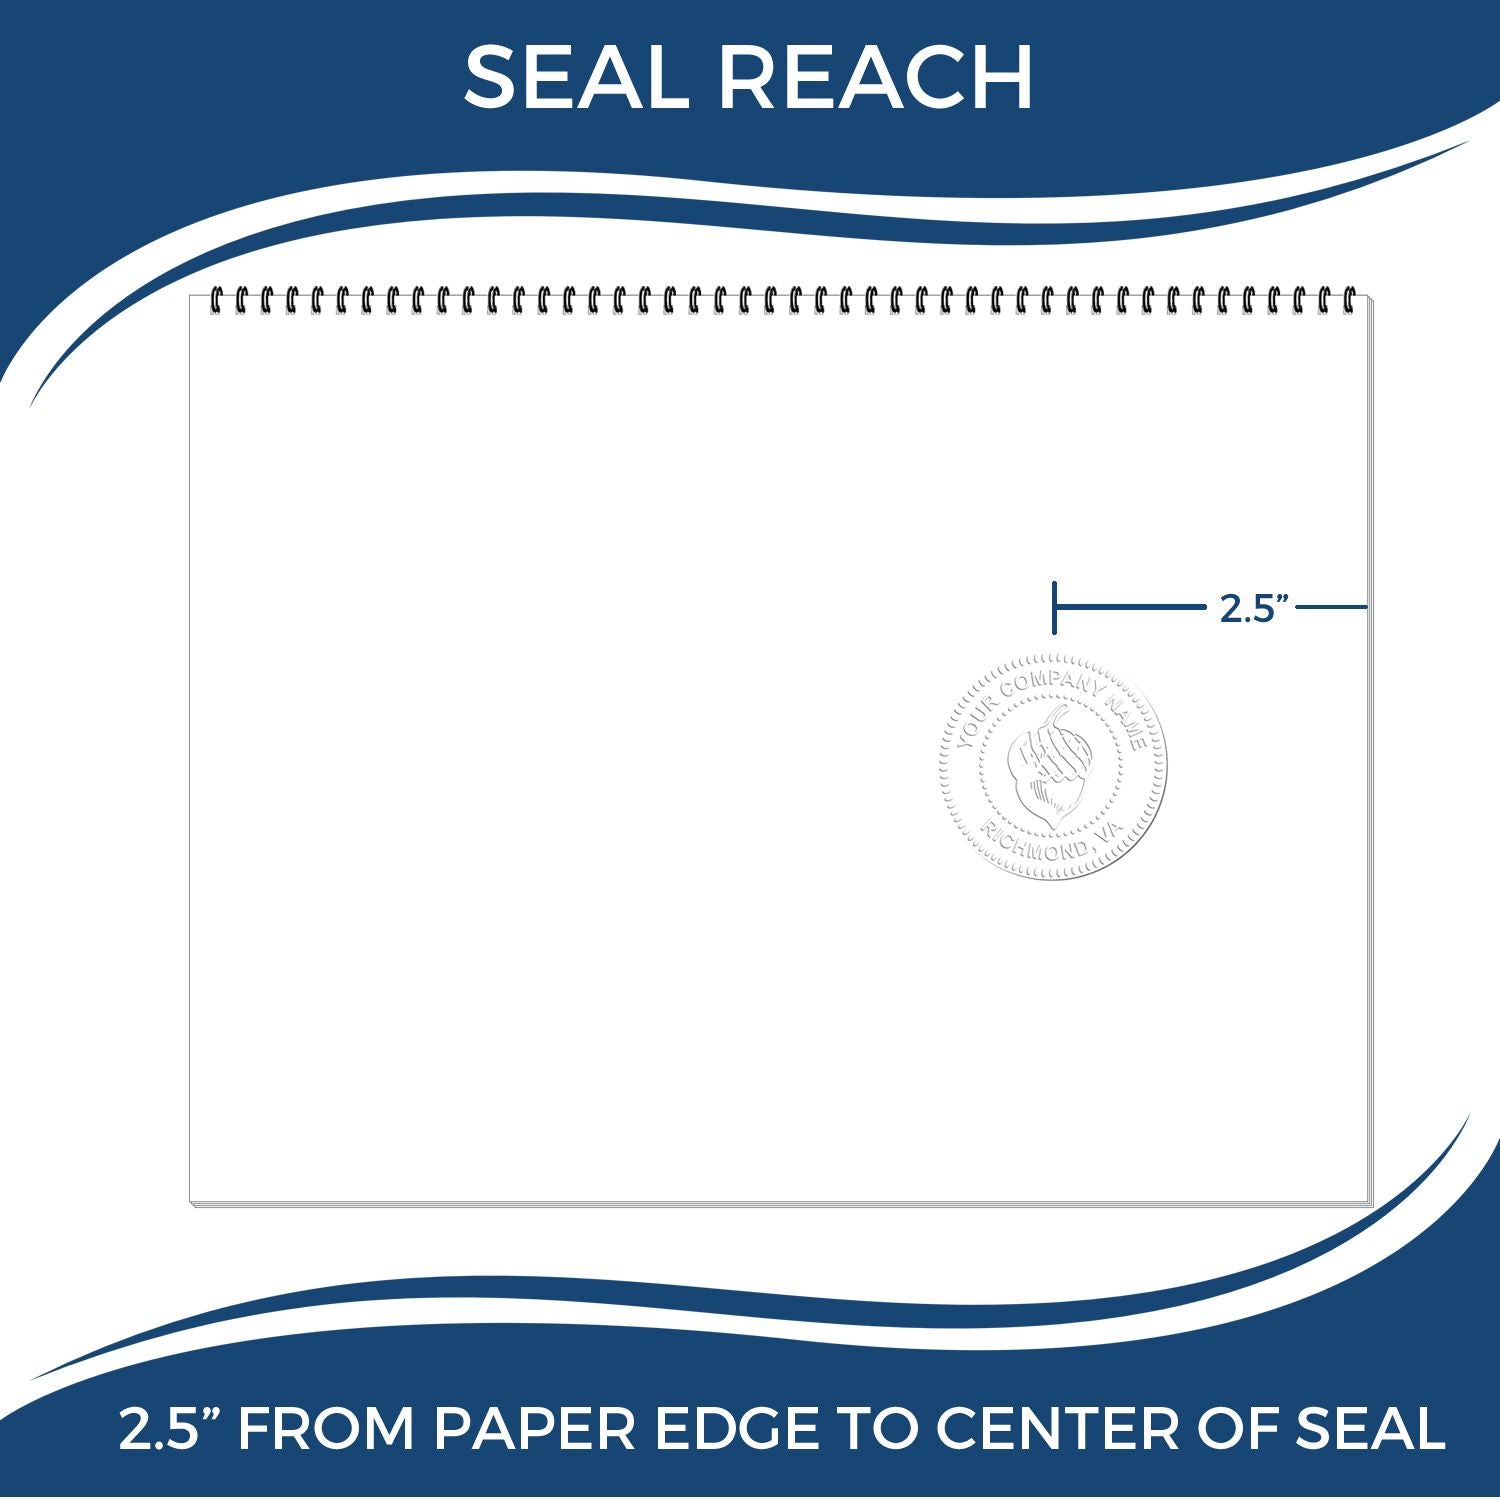 An infographic showing the seal reach which is represented by a ruler and a miniature seal image of the Heavy Duty Cast Iron Oklahoma Land Surveyor Seal Embosser